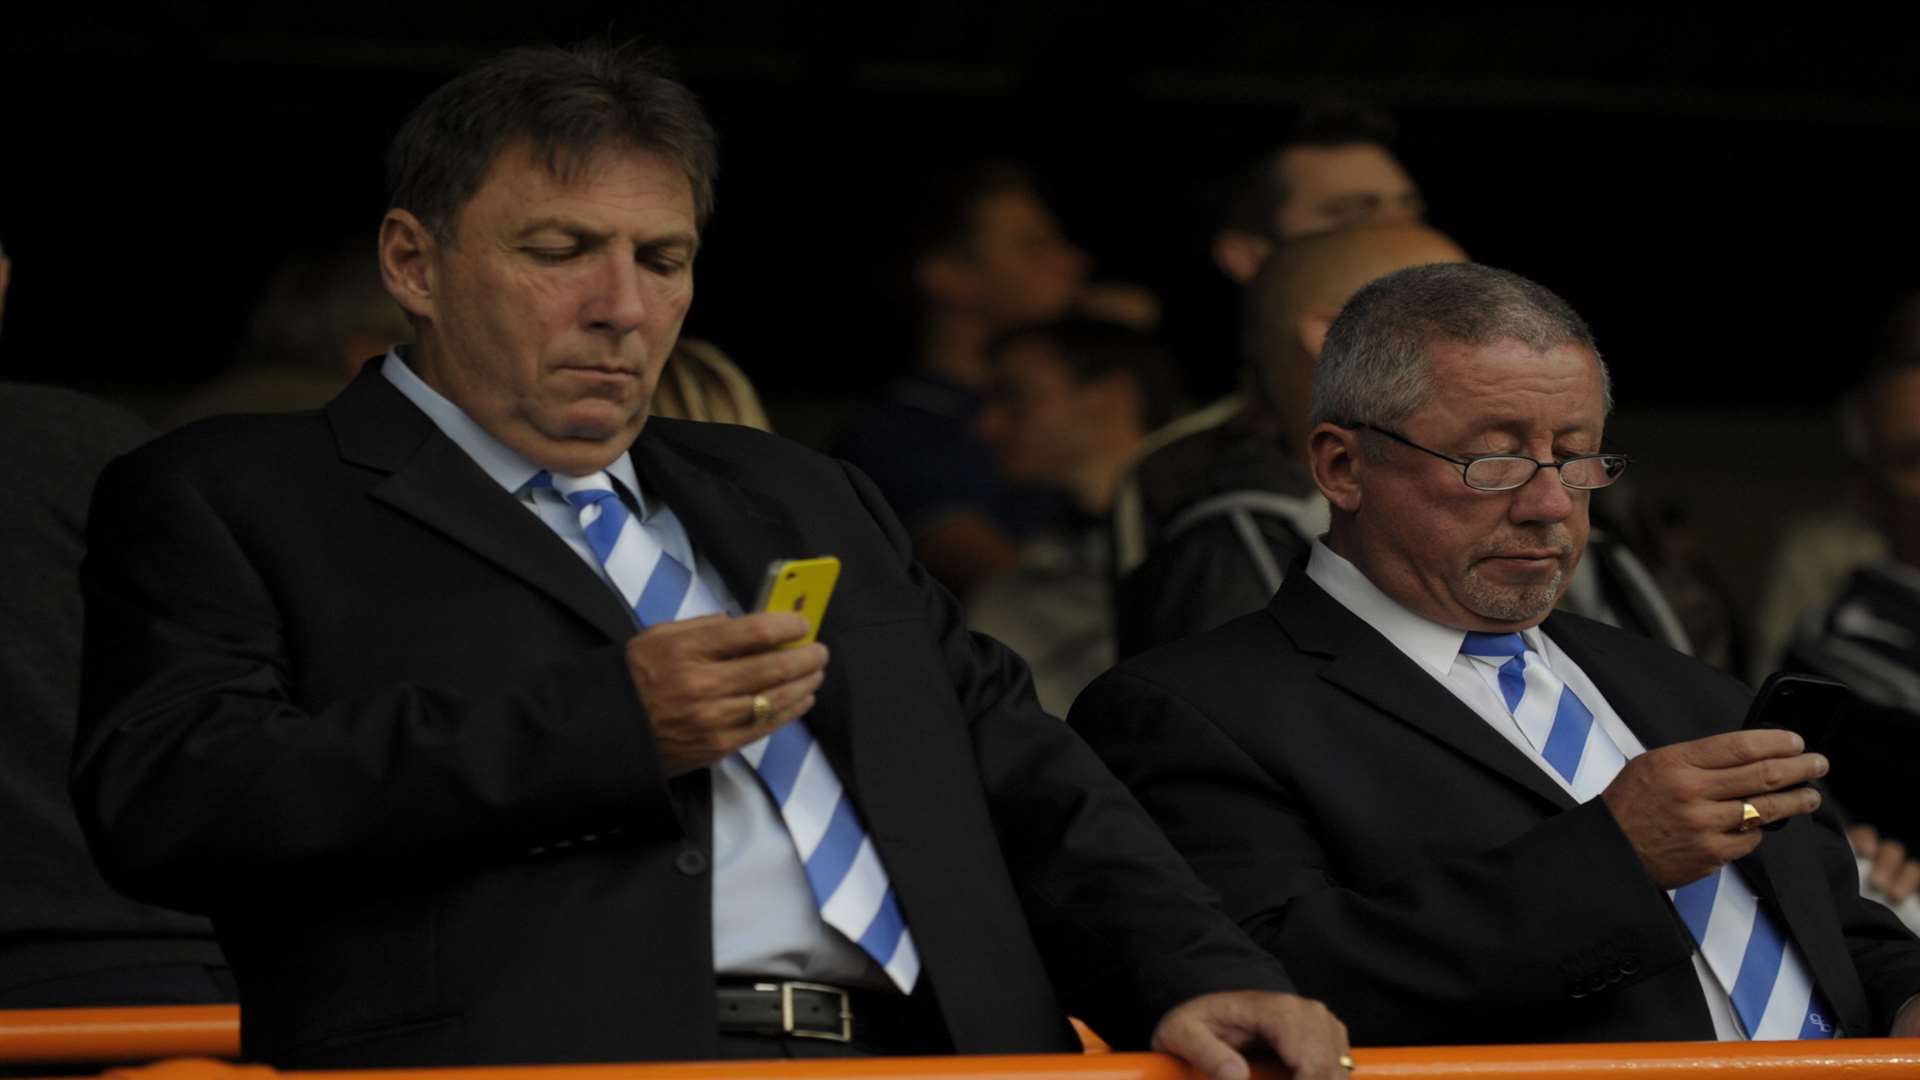 Former vice-chairman Michael Anderson next to Gillingham chairman Paul Scally